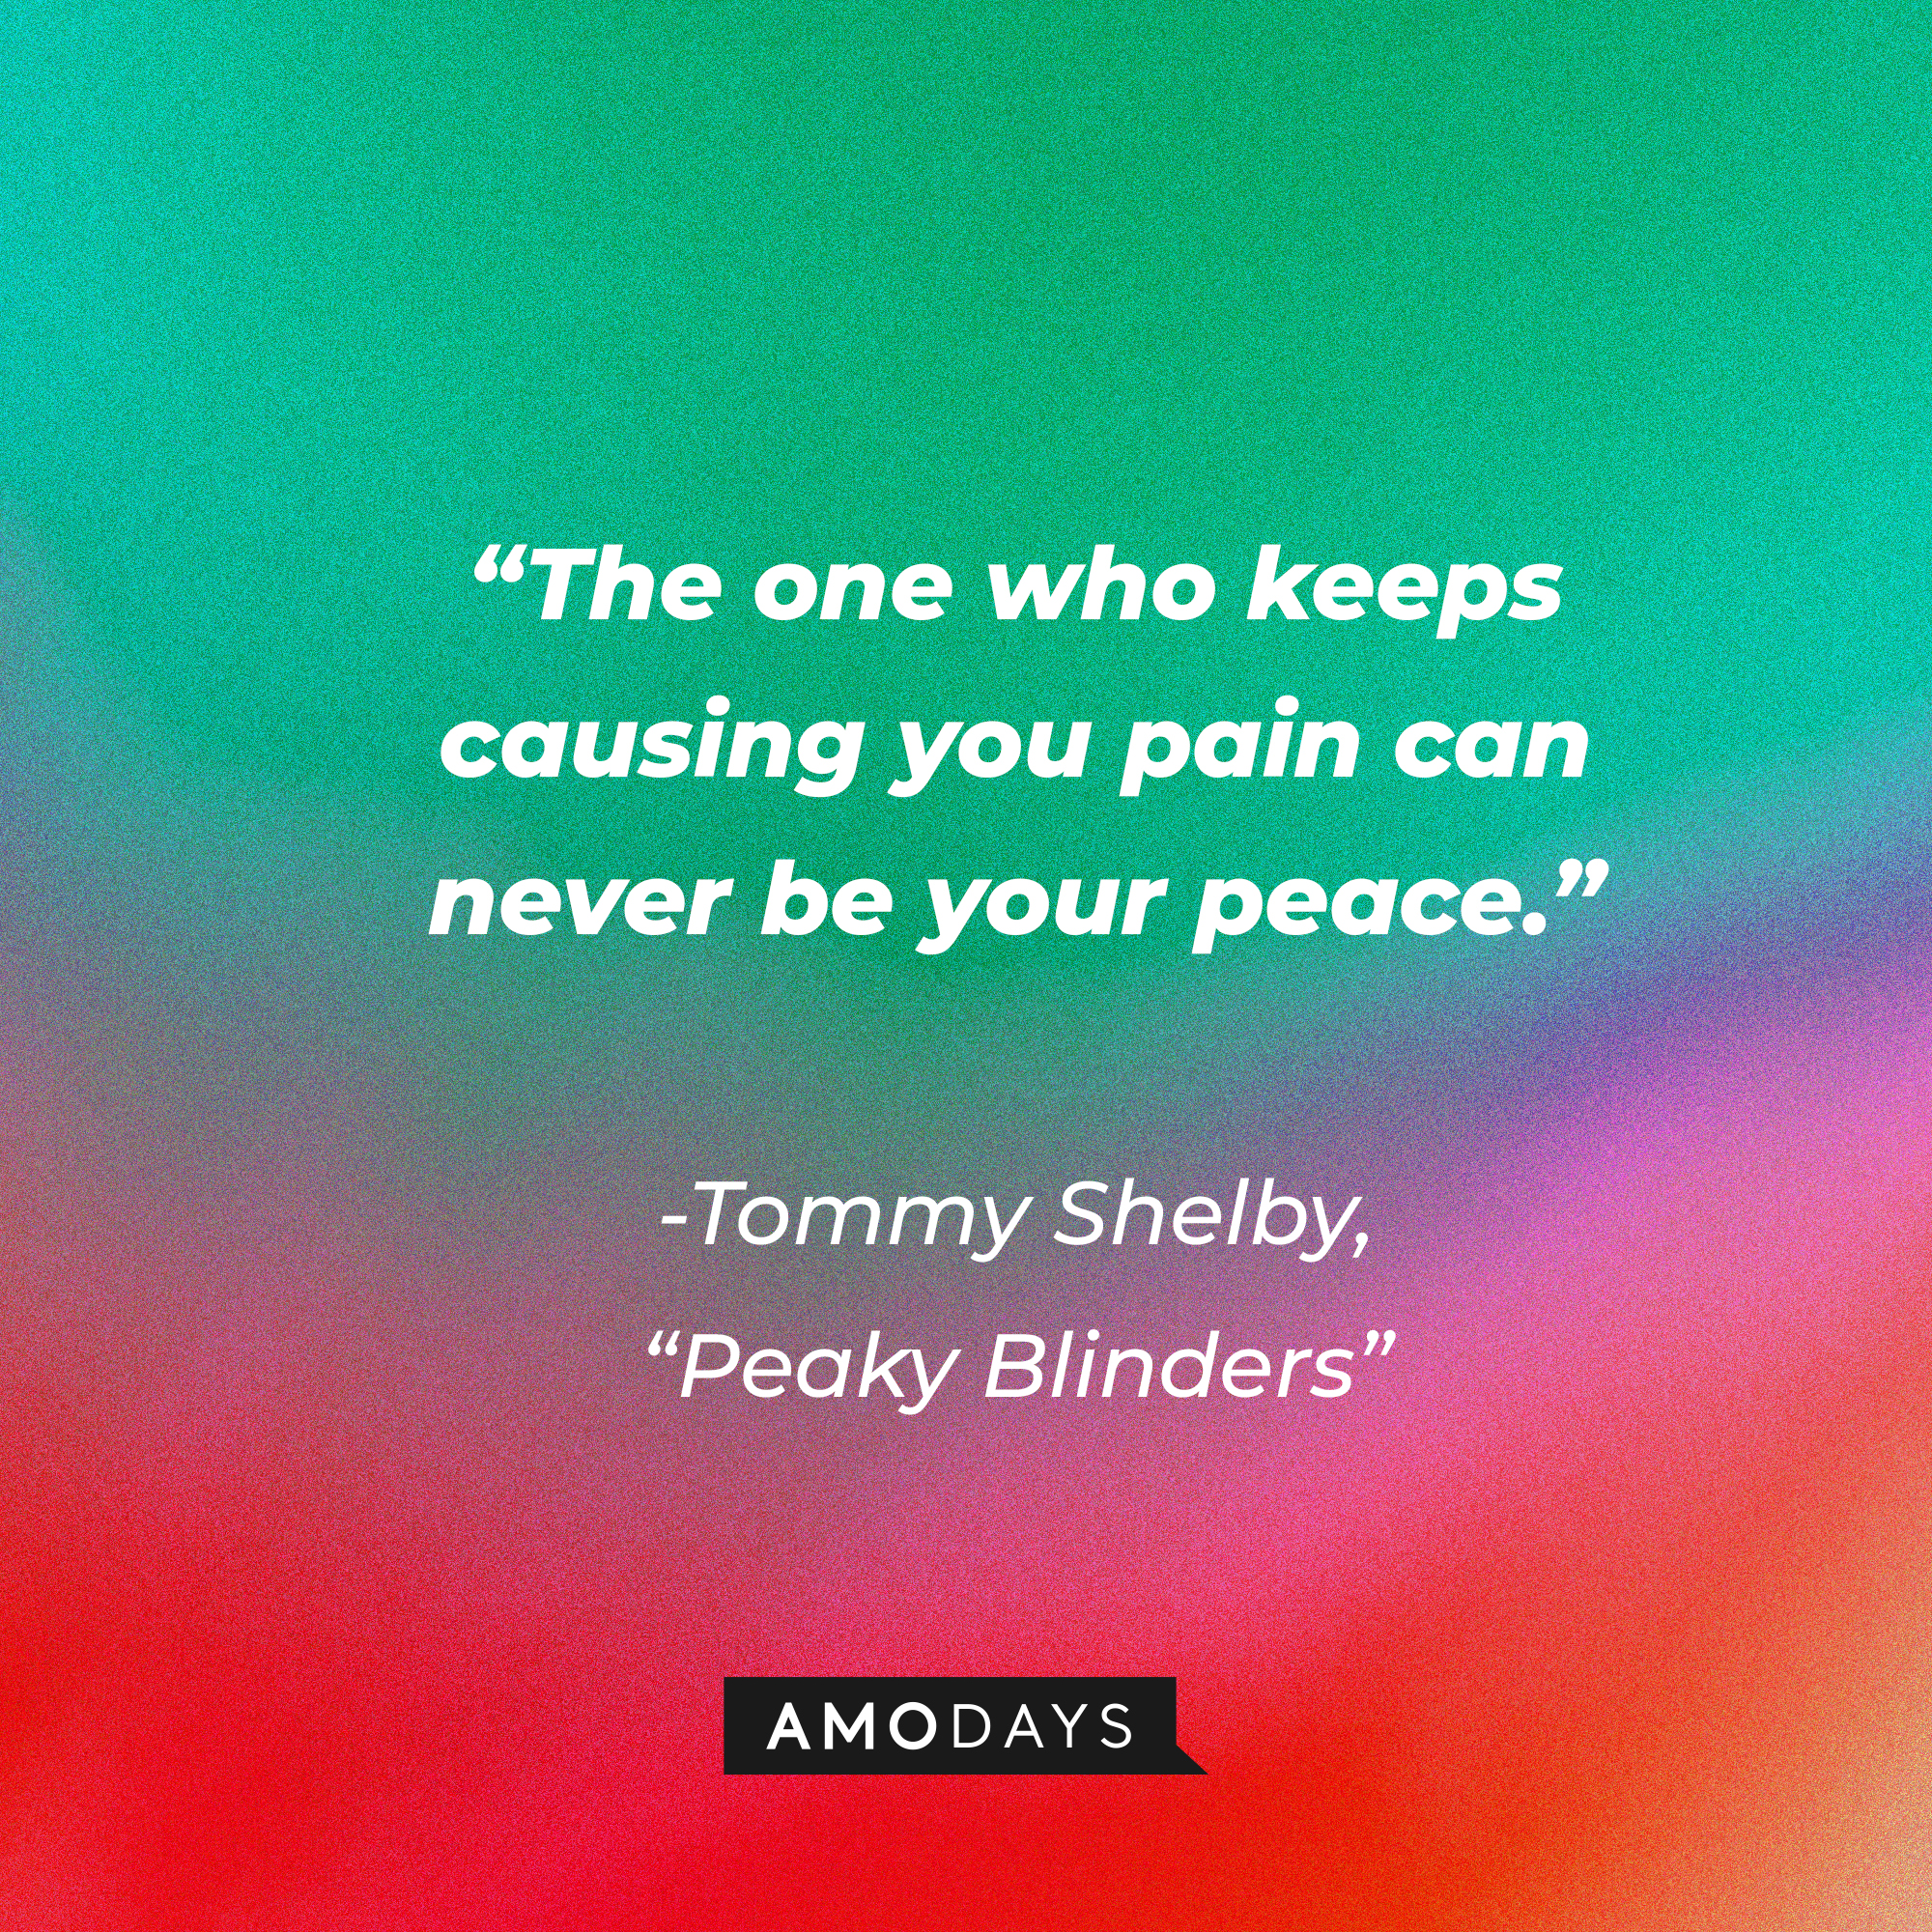 Tommy Shelby's his quote in "Peaky Blinders:" “The one who keeps causing you pain can never be your peace.”  | Source: Facebook.com/PeakyBlinders